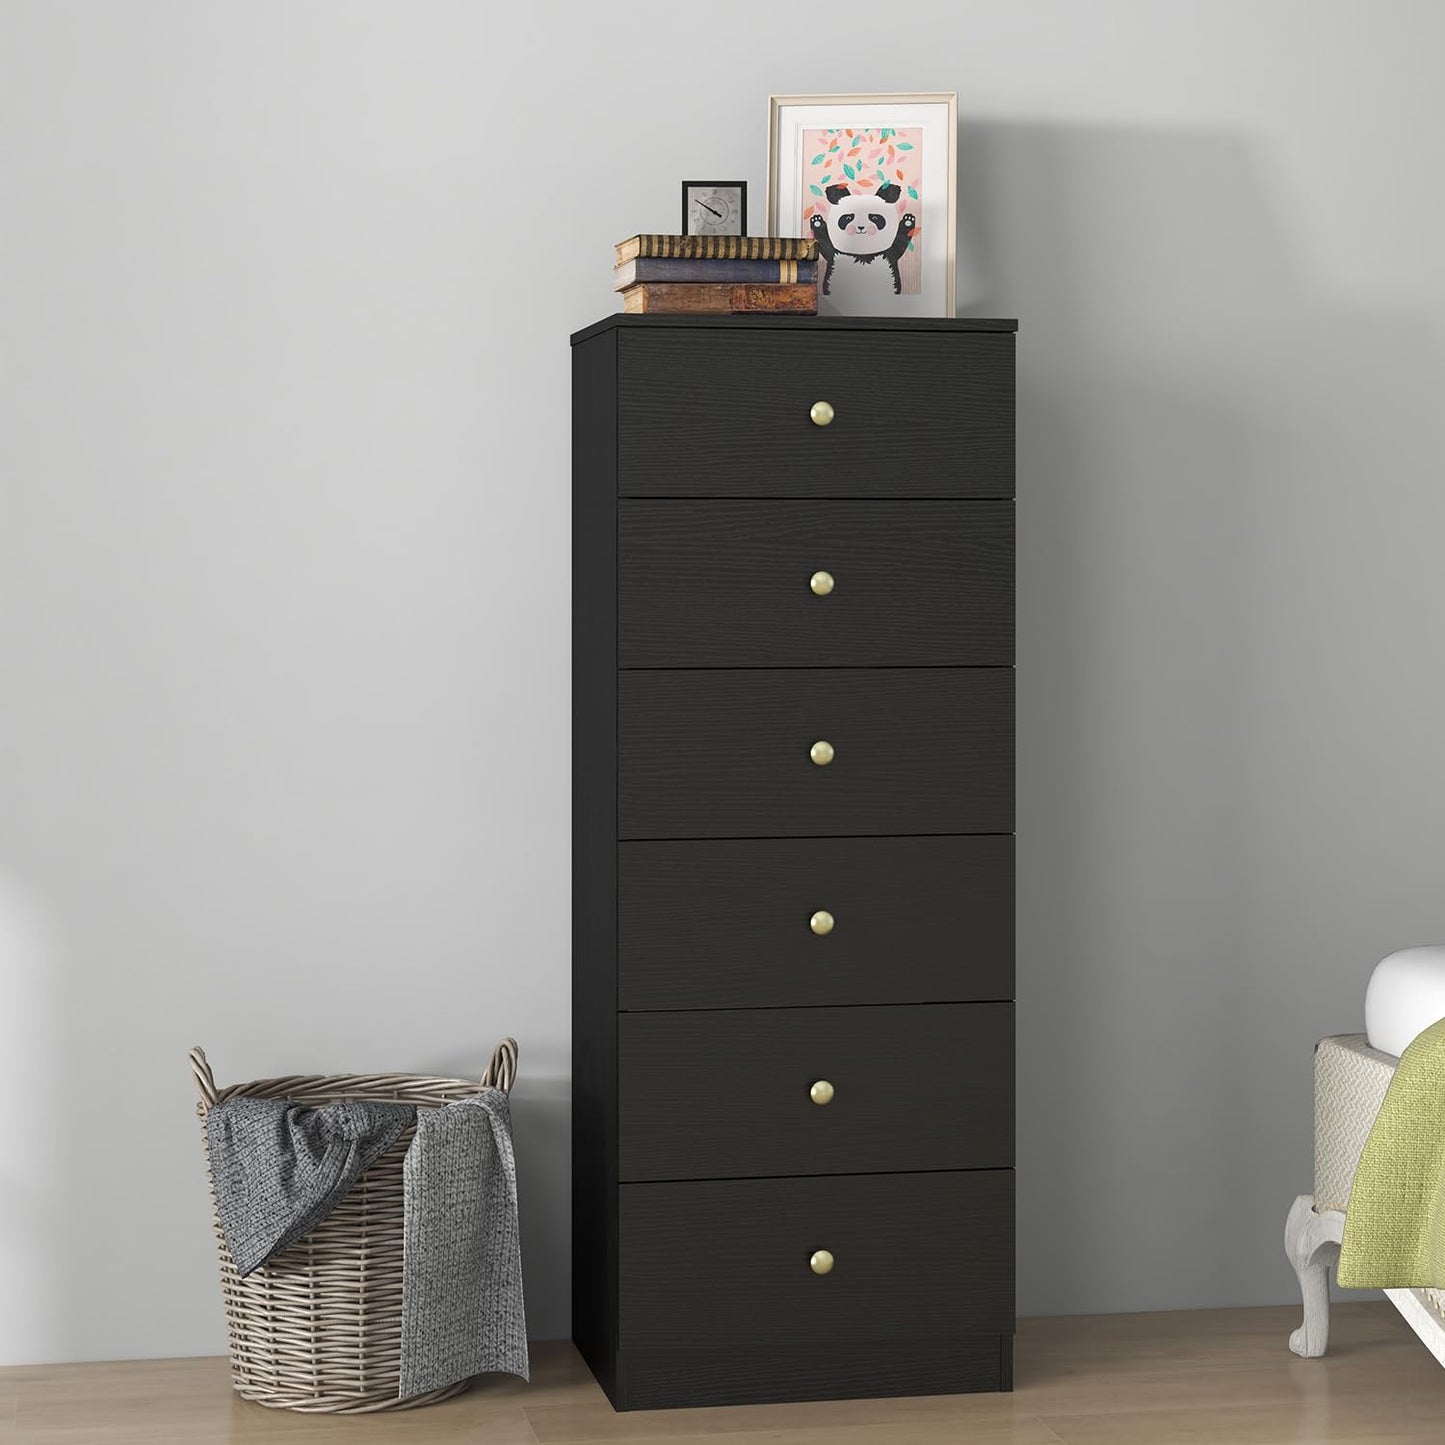 Modern 6 Drawer Vertical Dresser, Wood Tall Chest of Drawers N Arrow Storage Organizer with Wide Drawers & Metal Gold Handles for Bedroom, Living